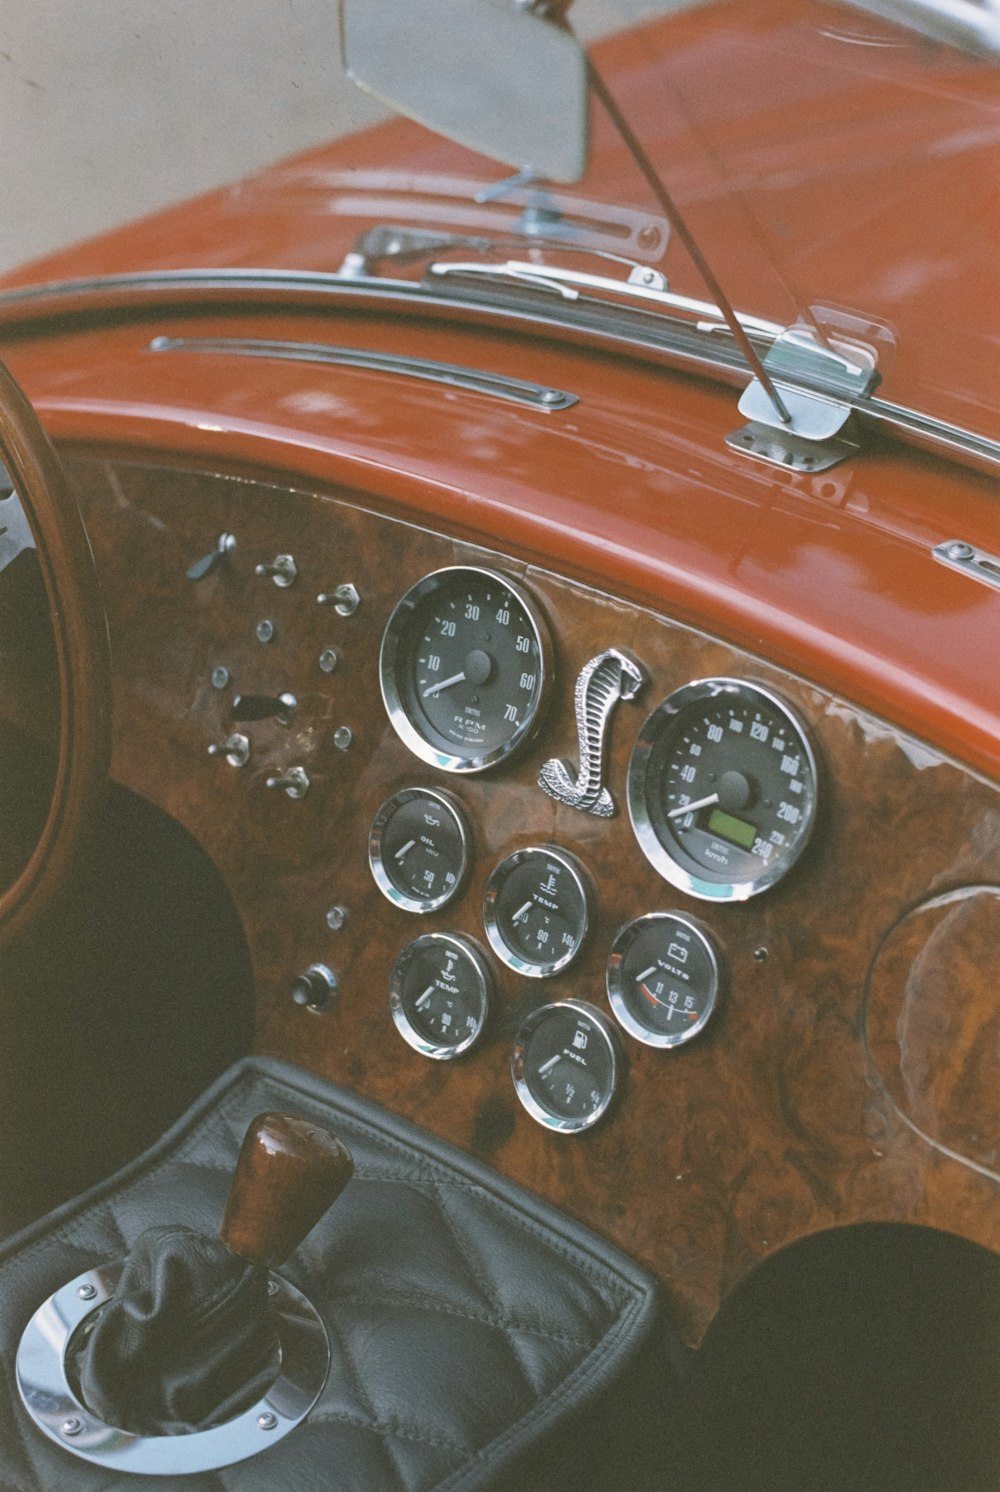 the dashboard of an old car with a wooden panel